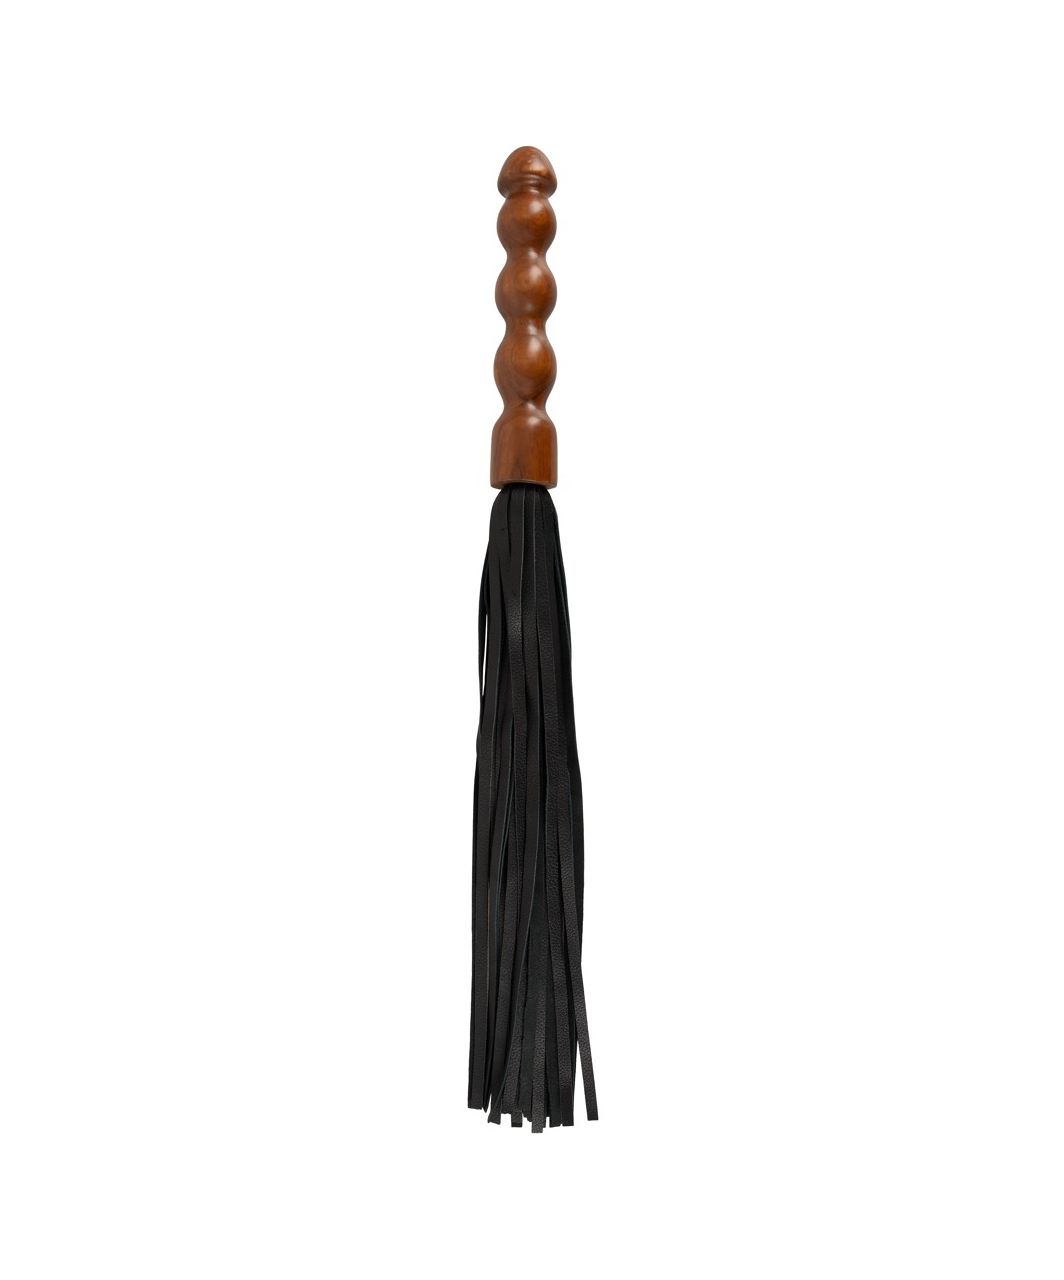 Zado leather flogger with wooden handle